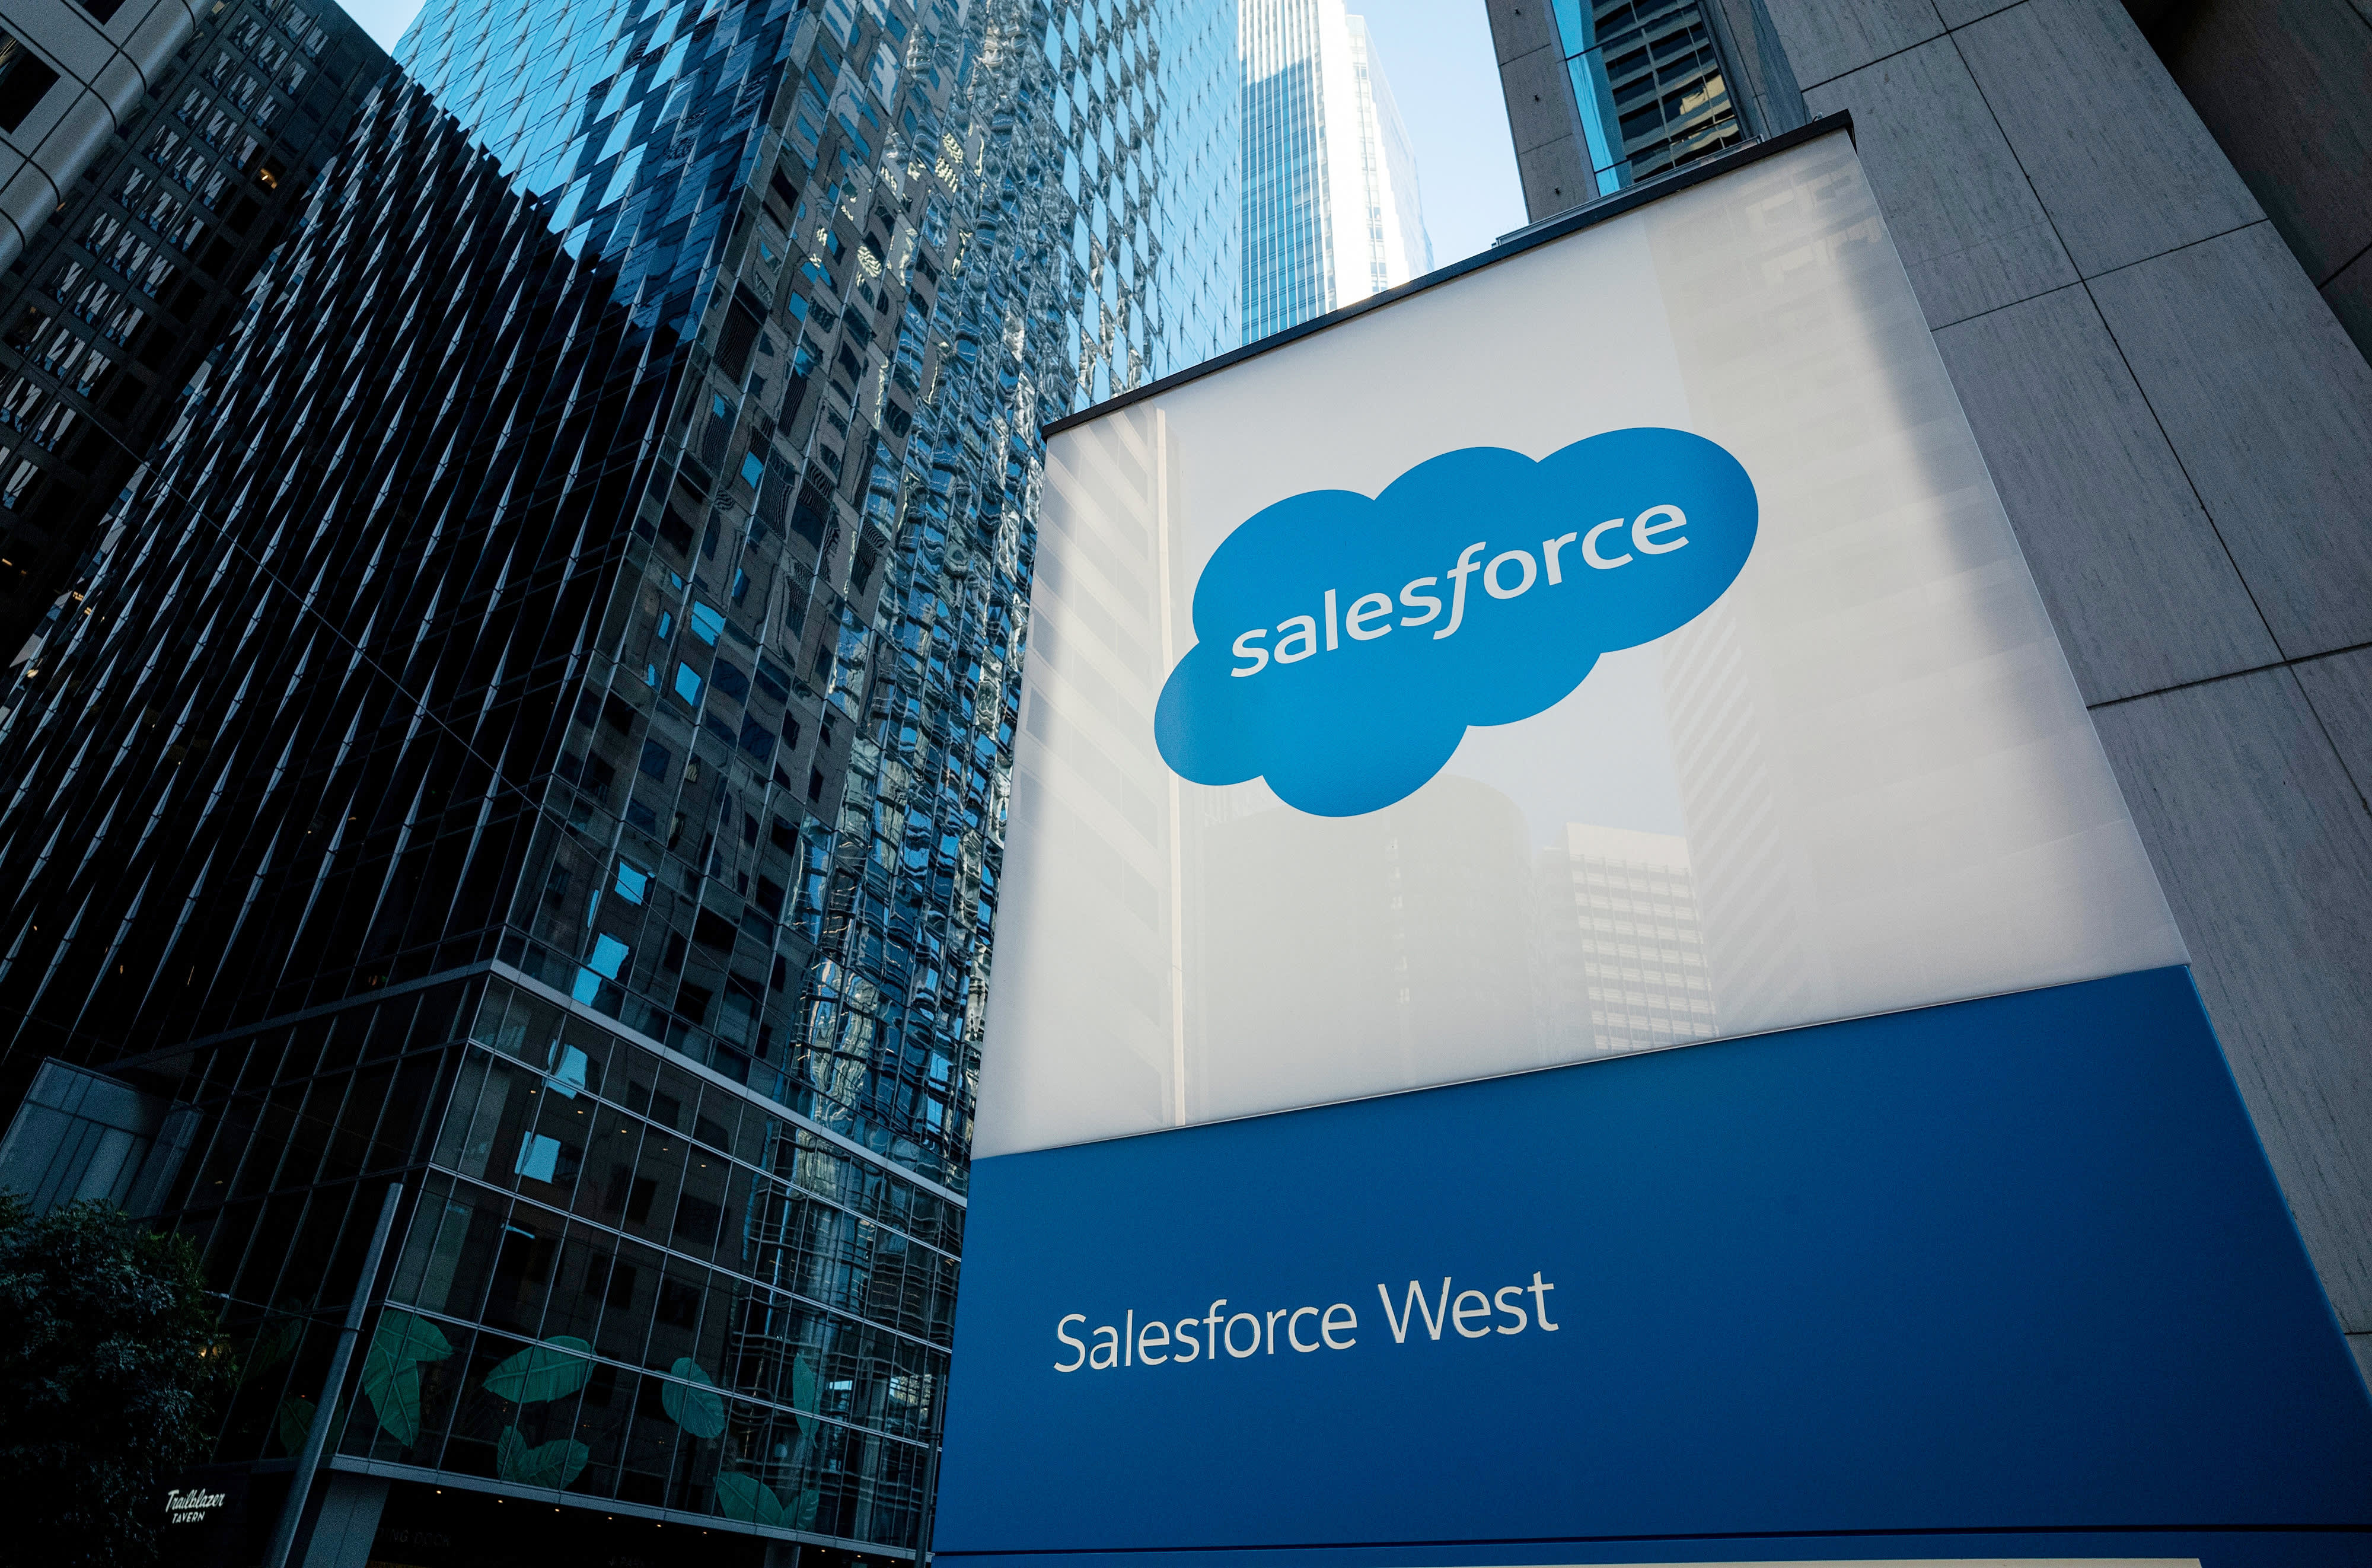 Cowen downgrades Salesforce as the company prepares for a slower growth era